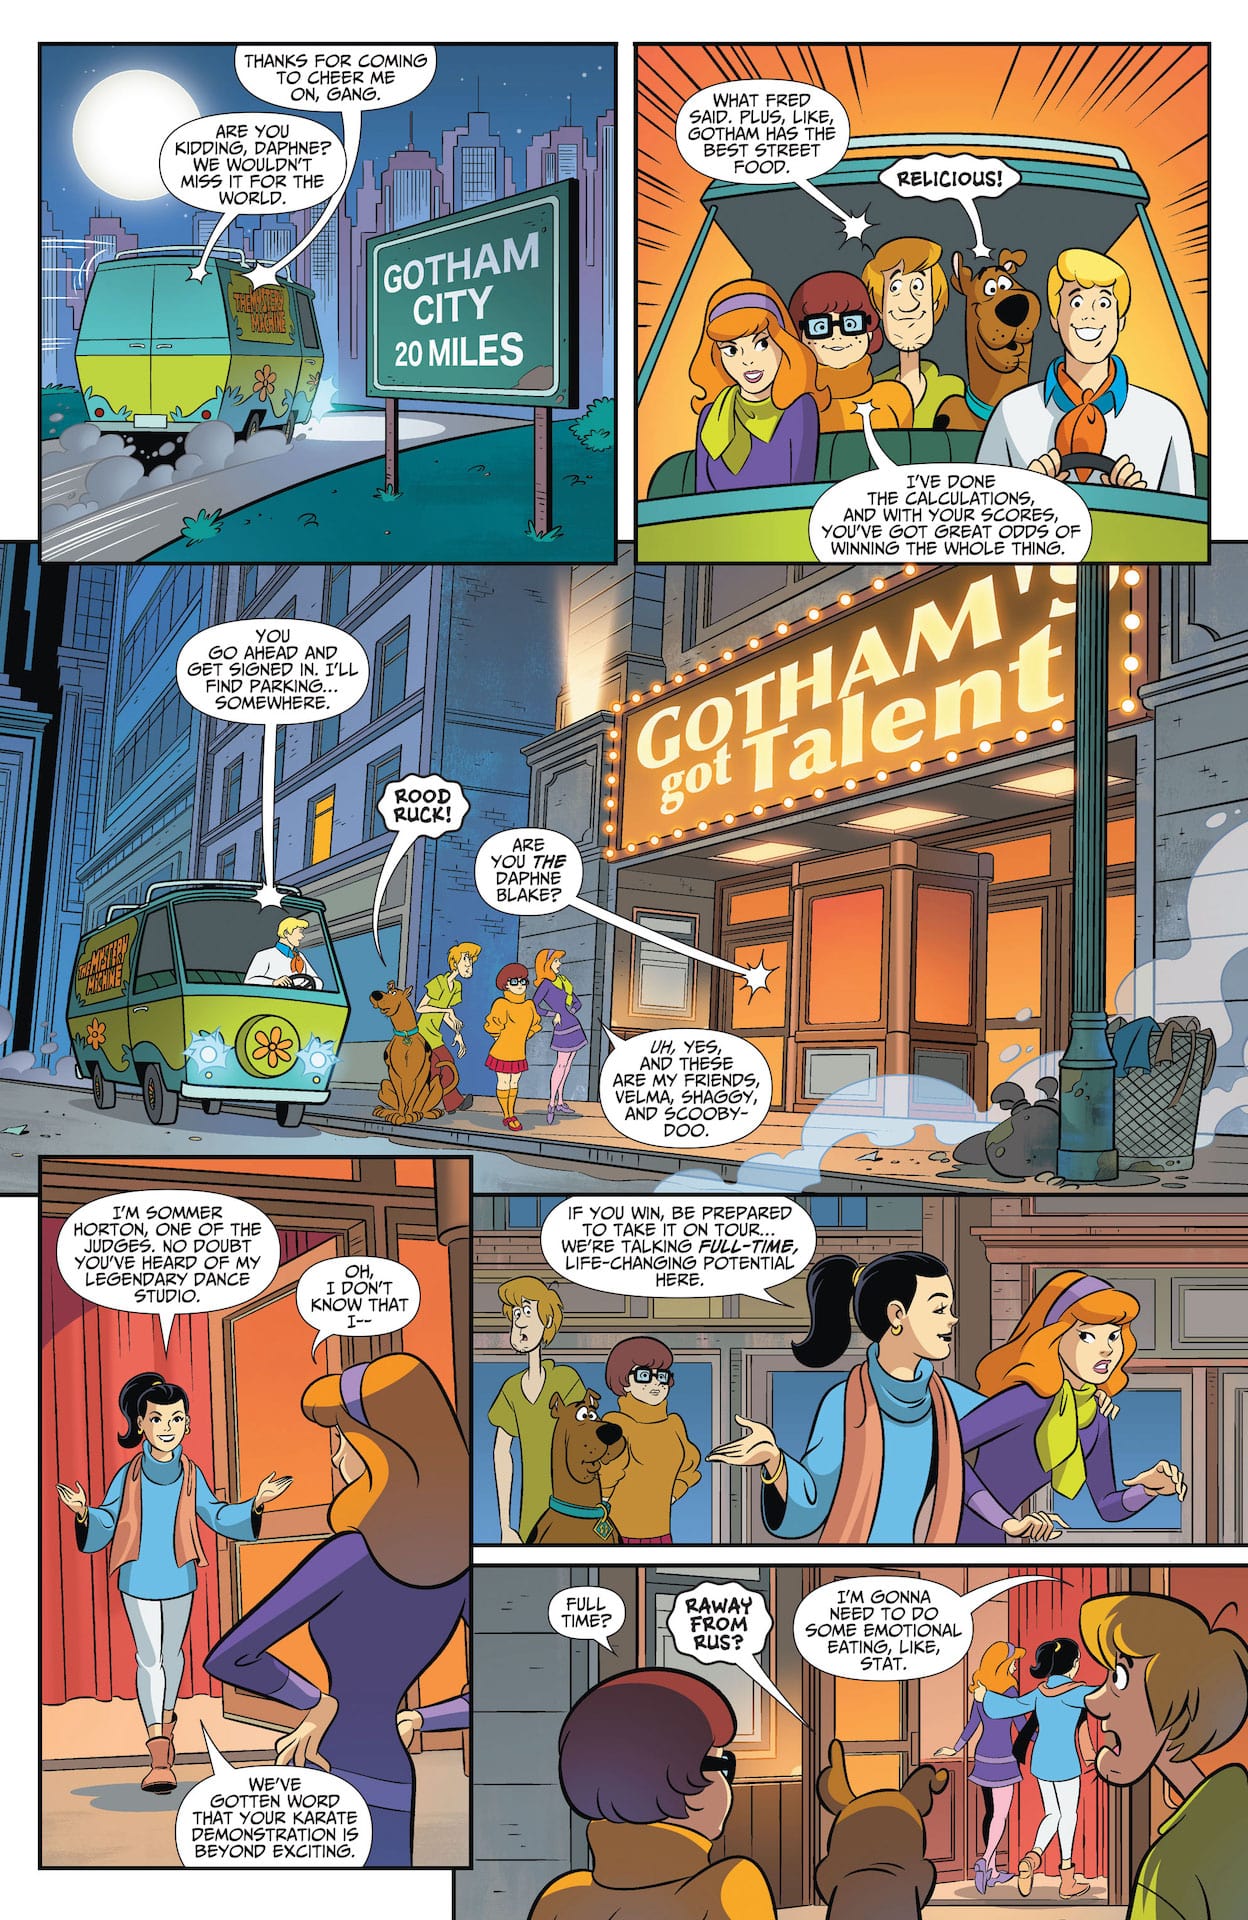 Batman and Scooby-Doo Mysteries #7 Preview: Gotham's Got Talent